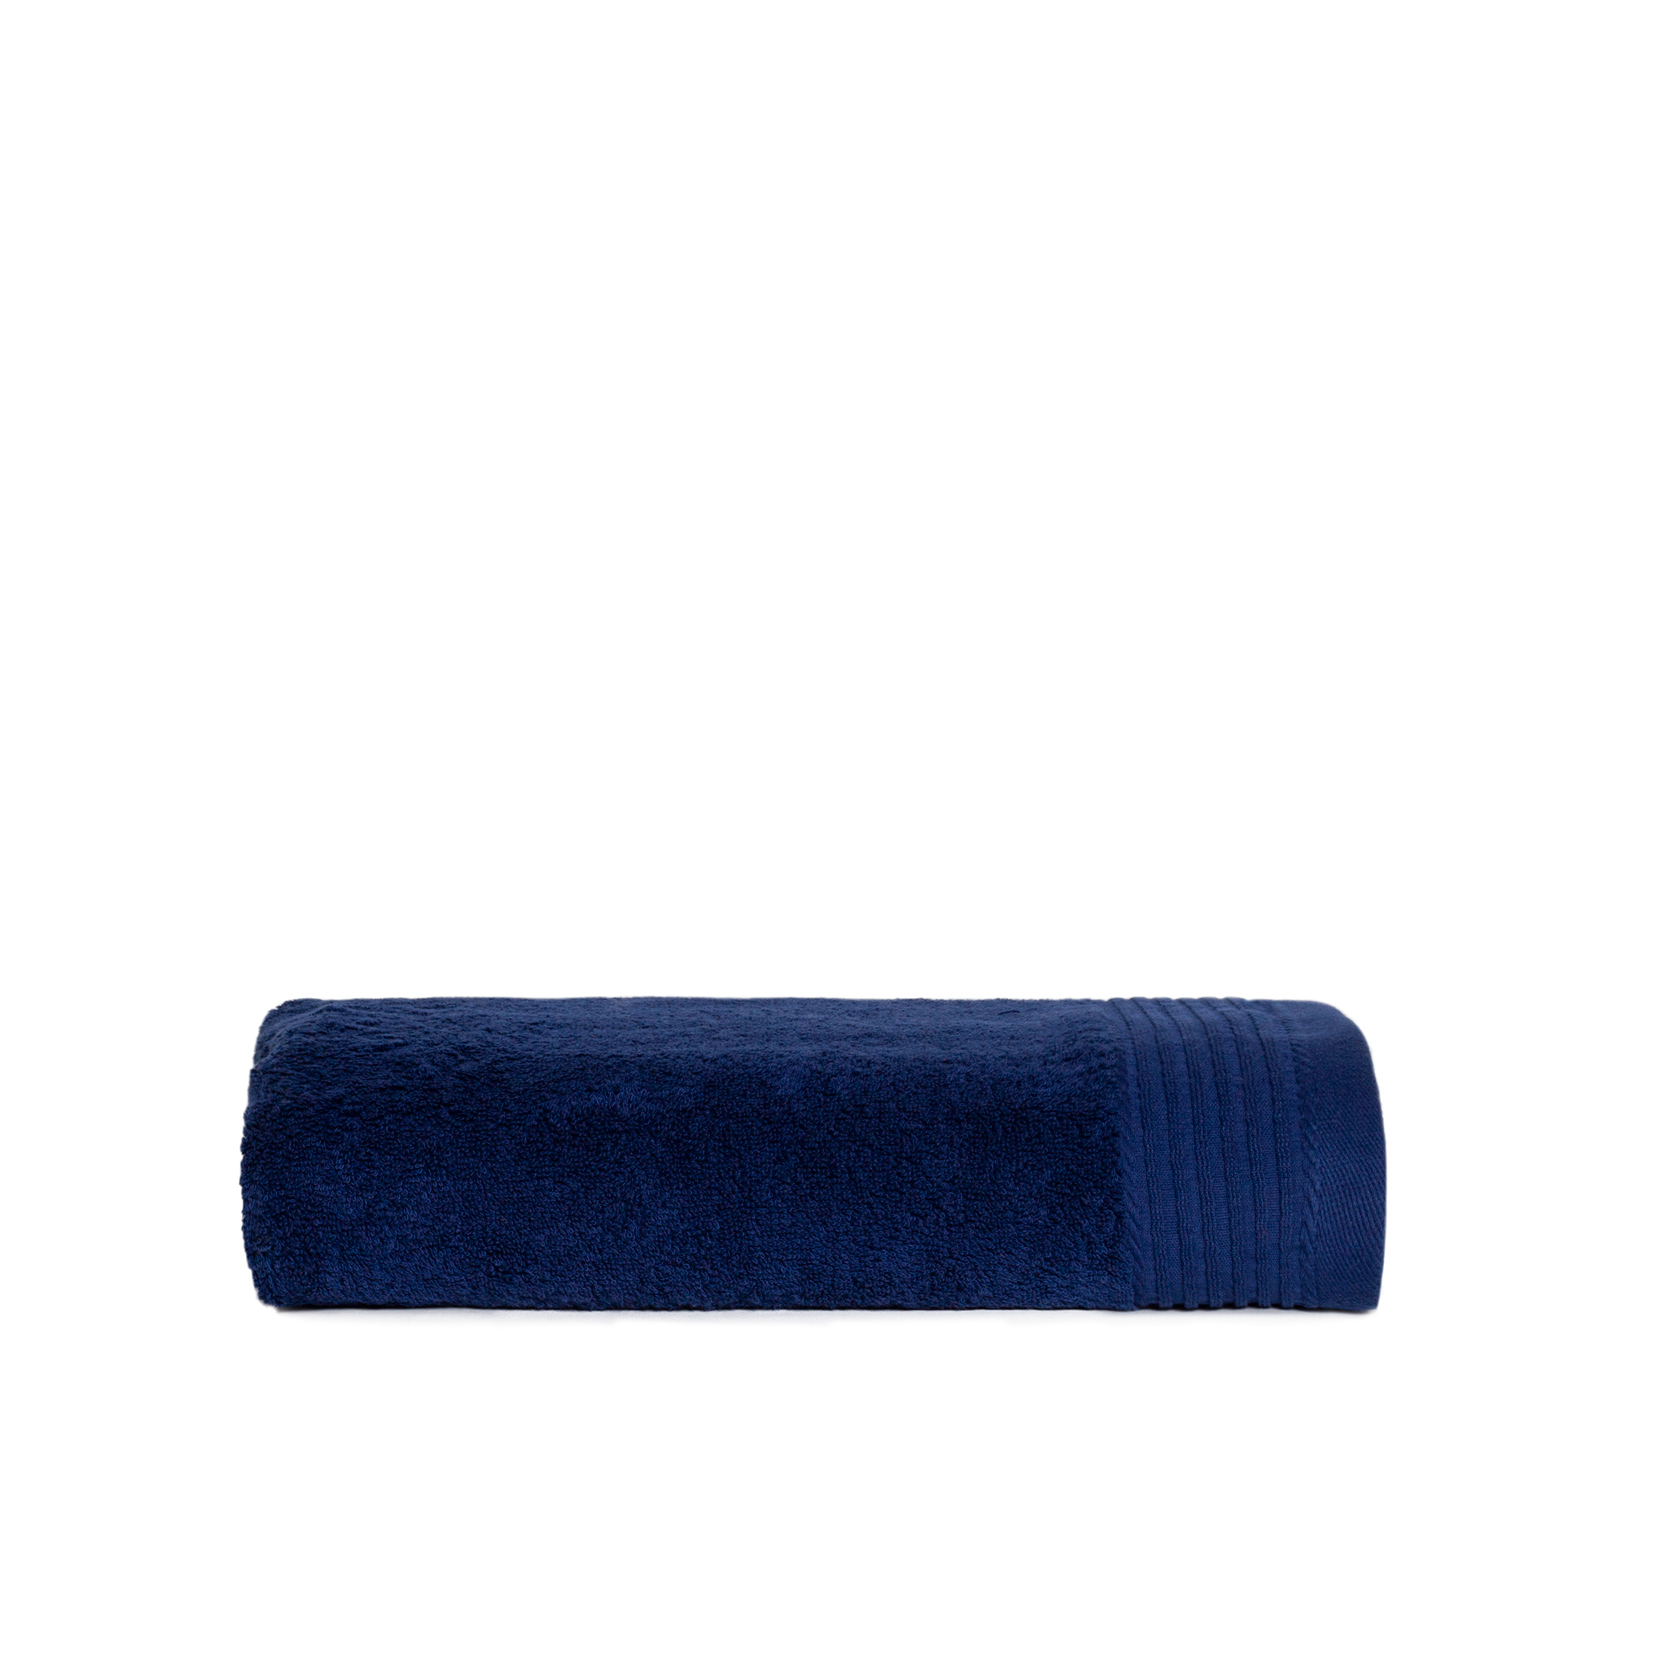 T1-DELUXE70NAVYBLUE-1